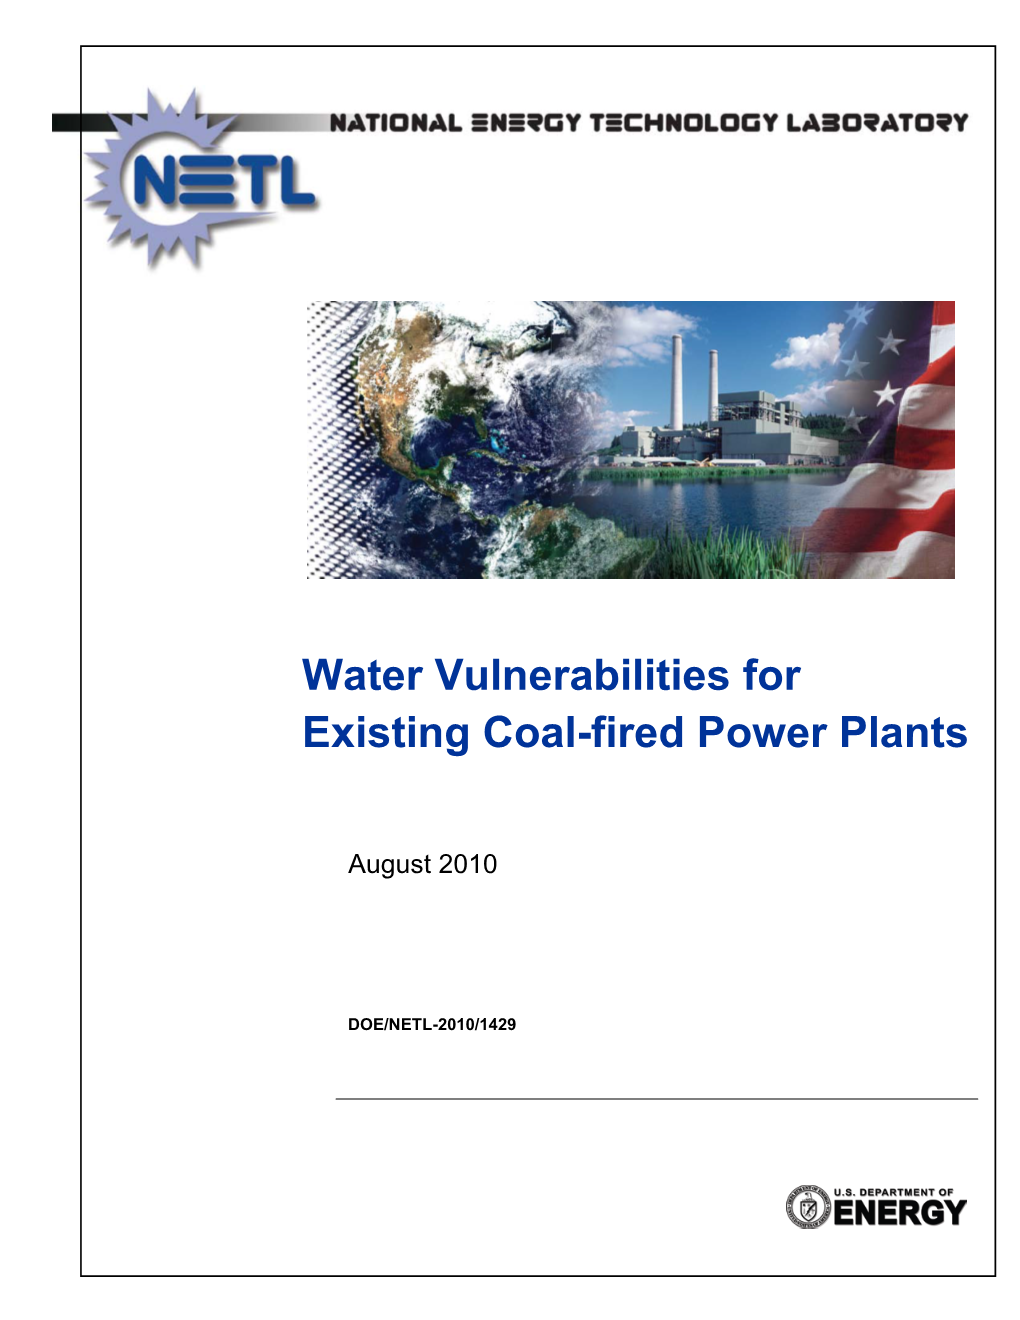 Water Vulnerabilities for Existing Coal-Fired Power Plants